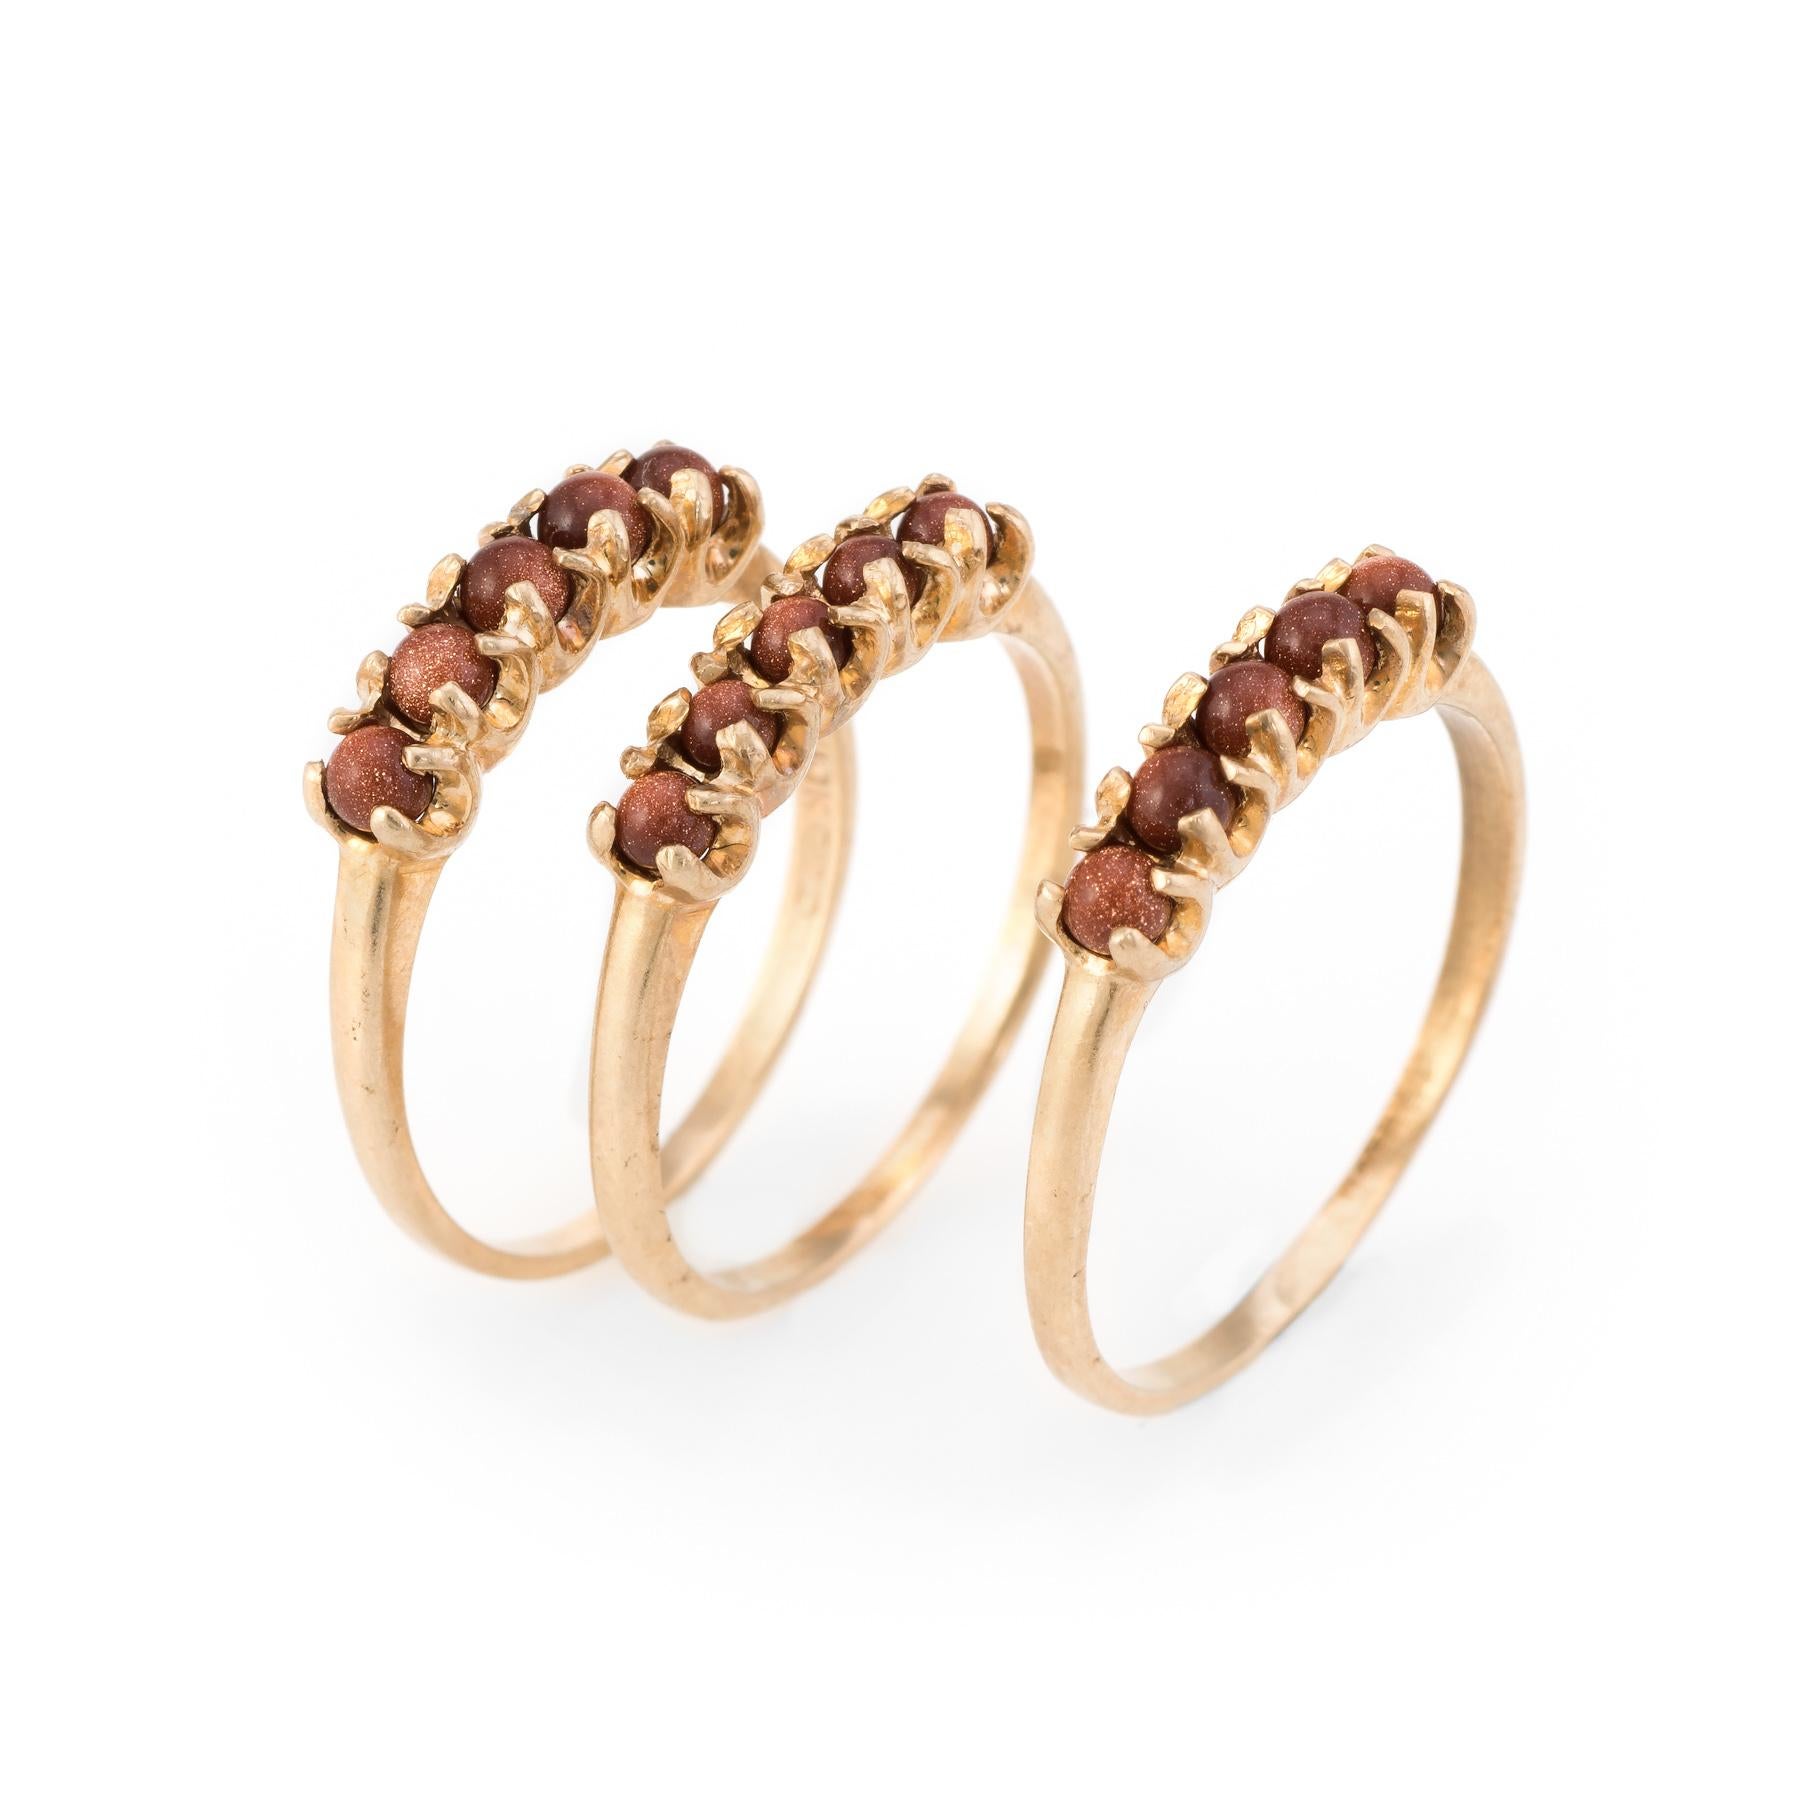 Finely detailed vintage set of 3 stacking rings, crafted in 10 karat yellow gold. 

Cabochon cut goldstone measures 2mm each (5 piece set into each of the bands). The stone is in excellent condition and free of cracks or chips. The goldstone